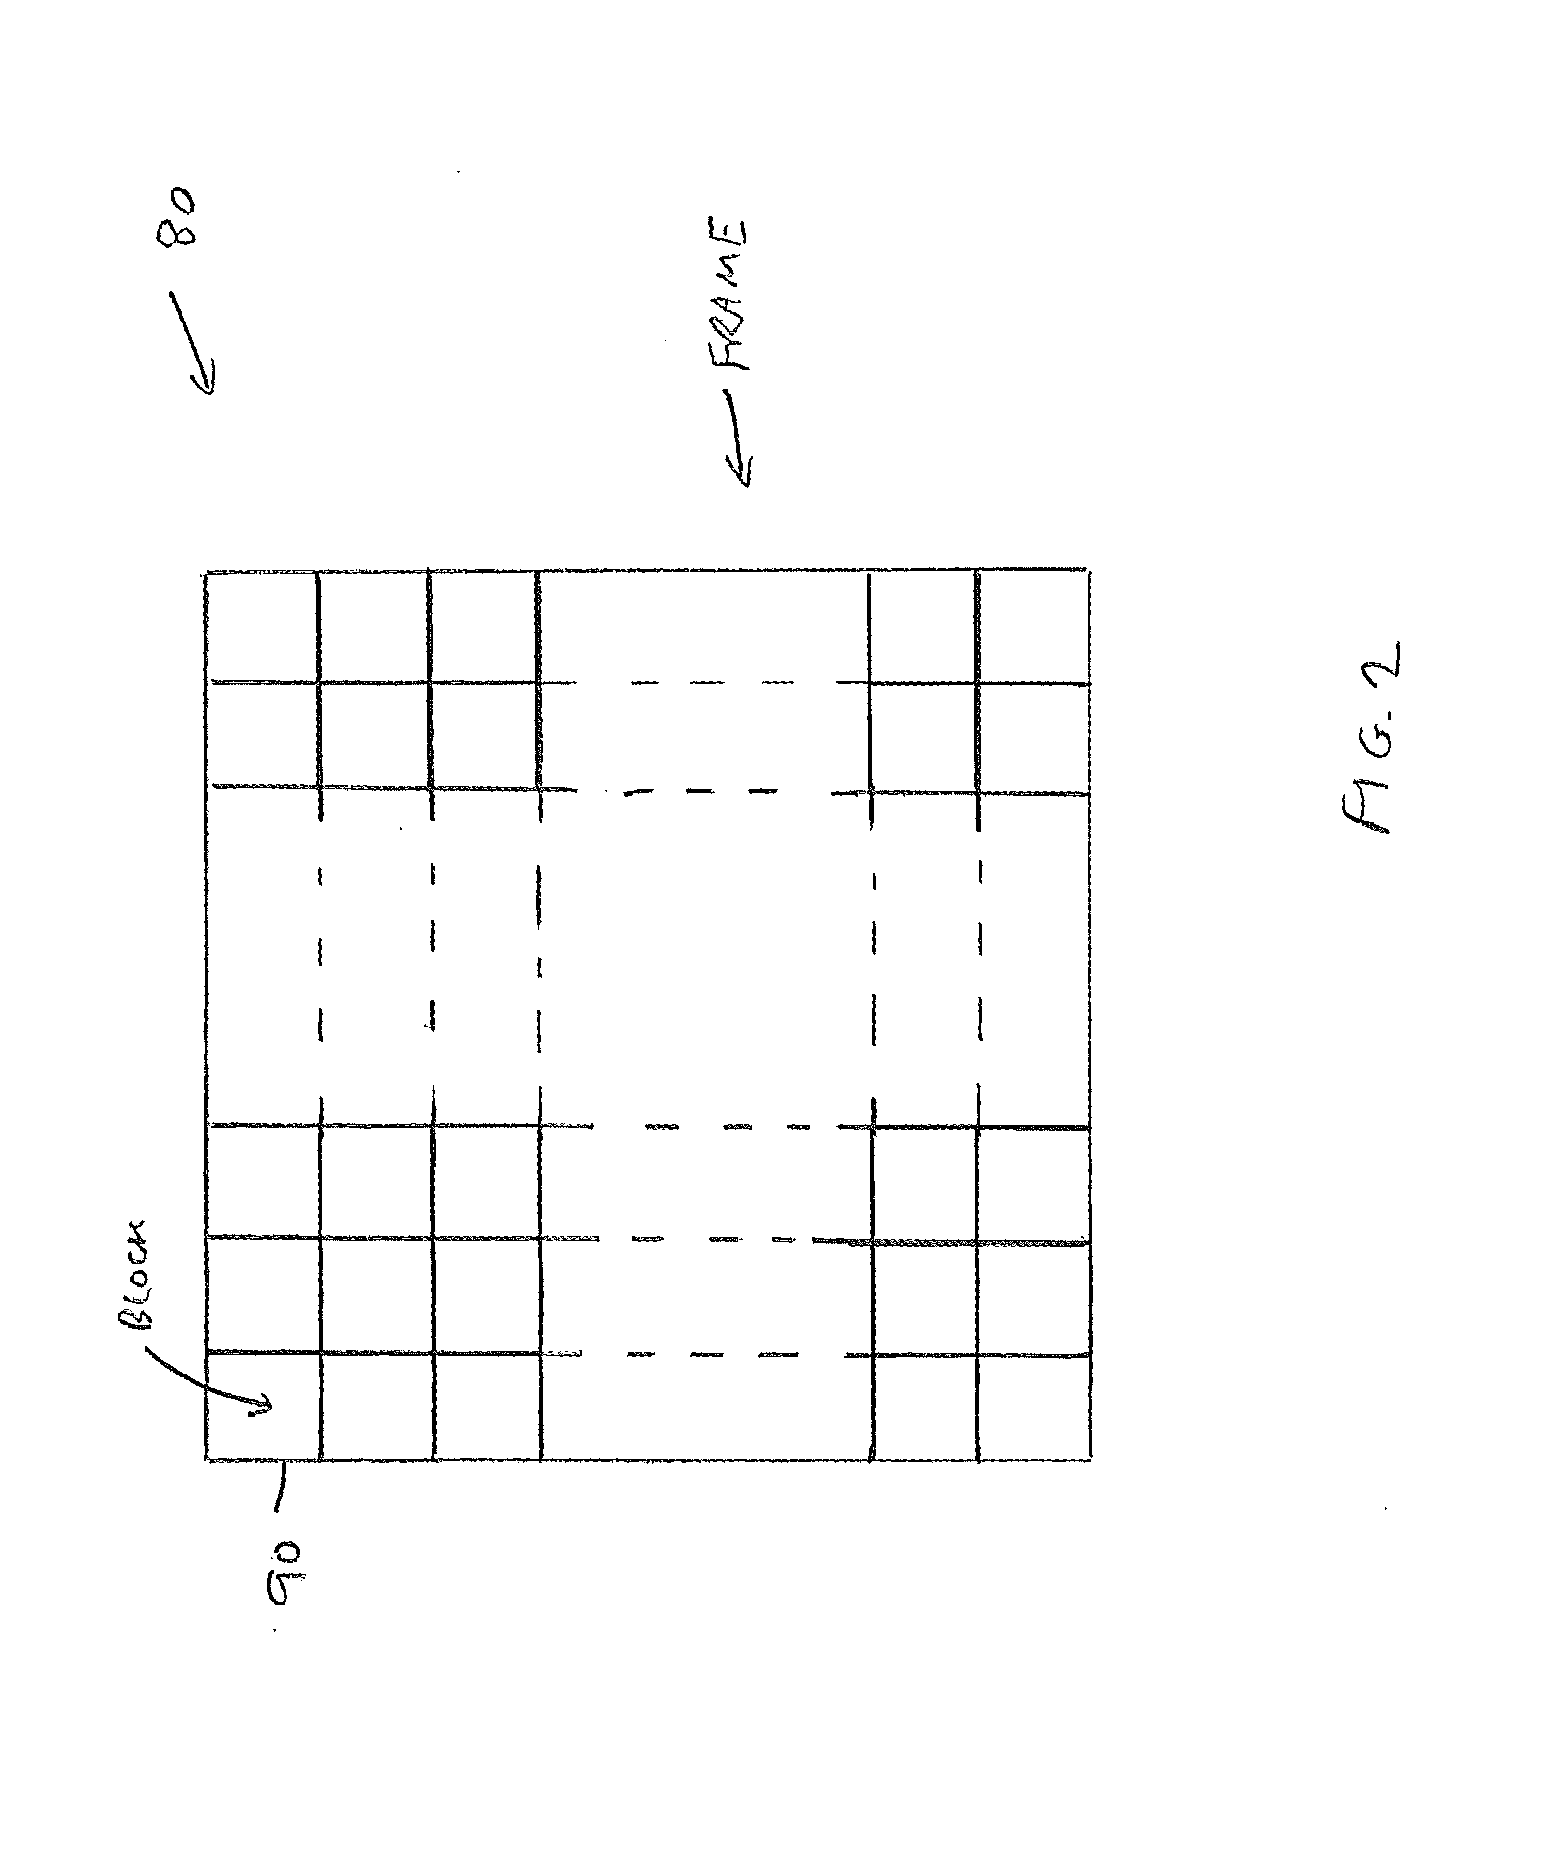 Image processing apparatus and a method of storing encoded data blocks generated by such an image processing apparatus